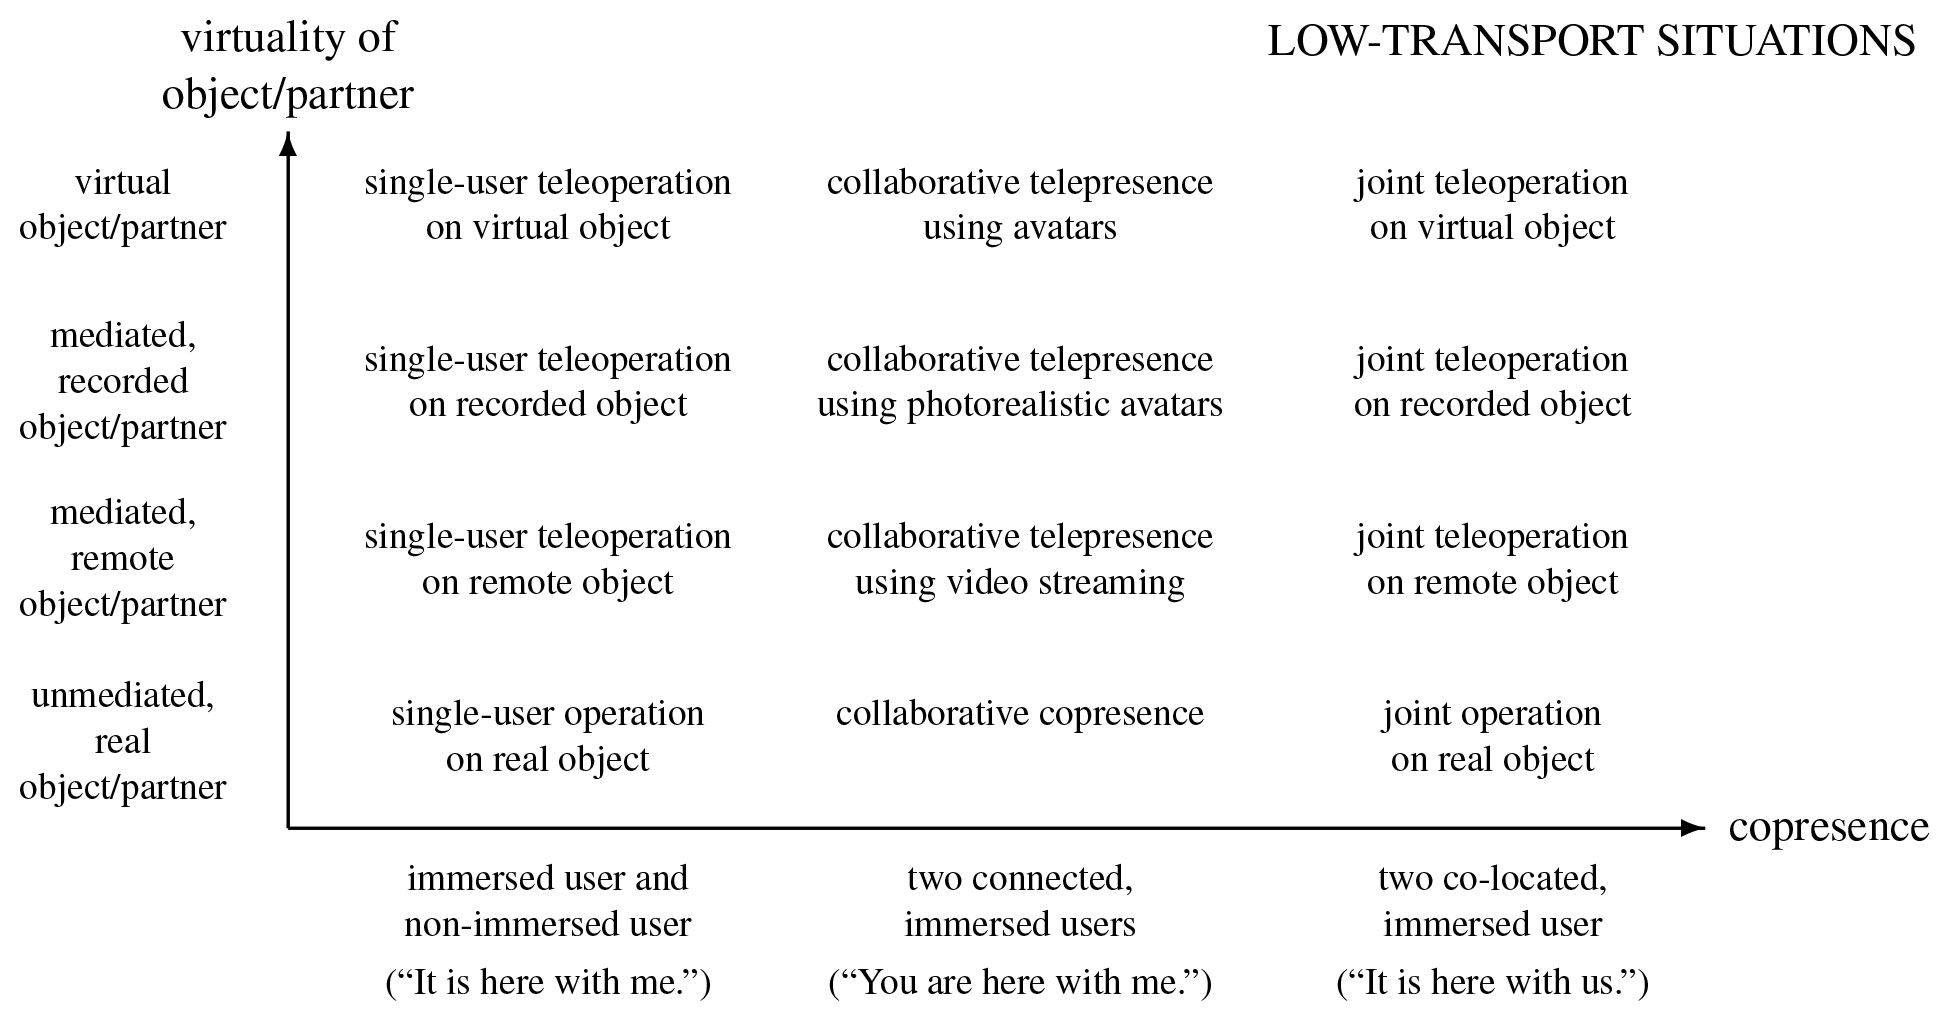 The dimensions of copresence (horizontal) and virtuality (vertical) of our classification for low-transport situations. The row labeled "unmediated, real object/partner" is an extension for real objects/partners.